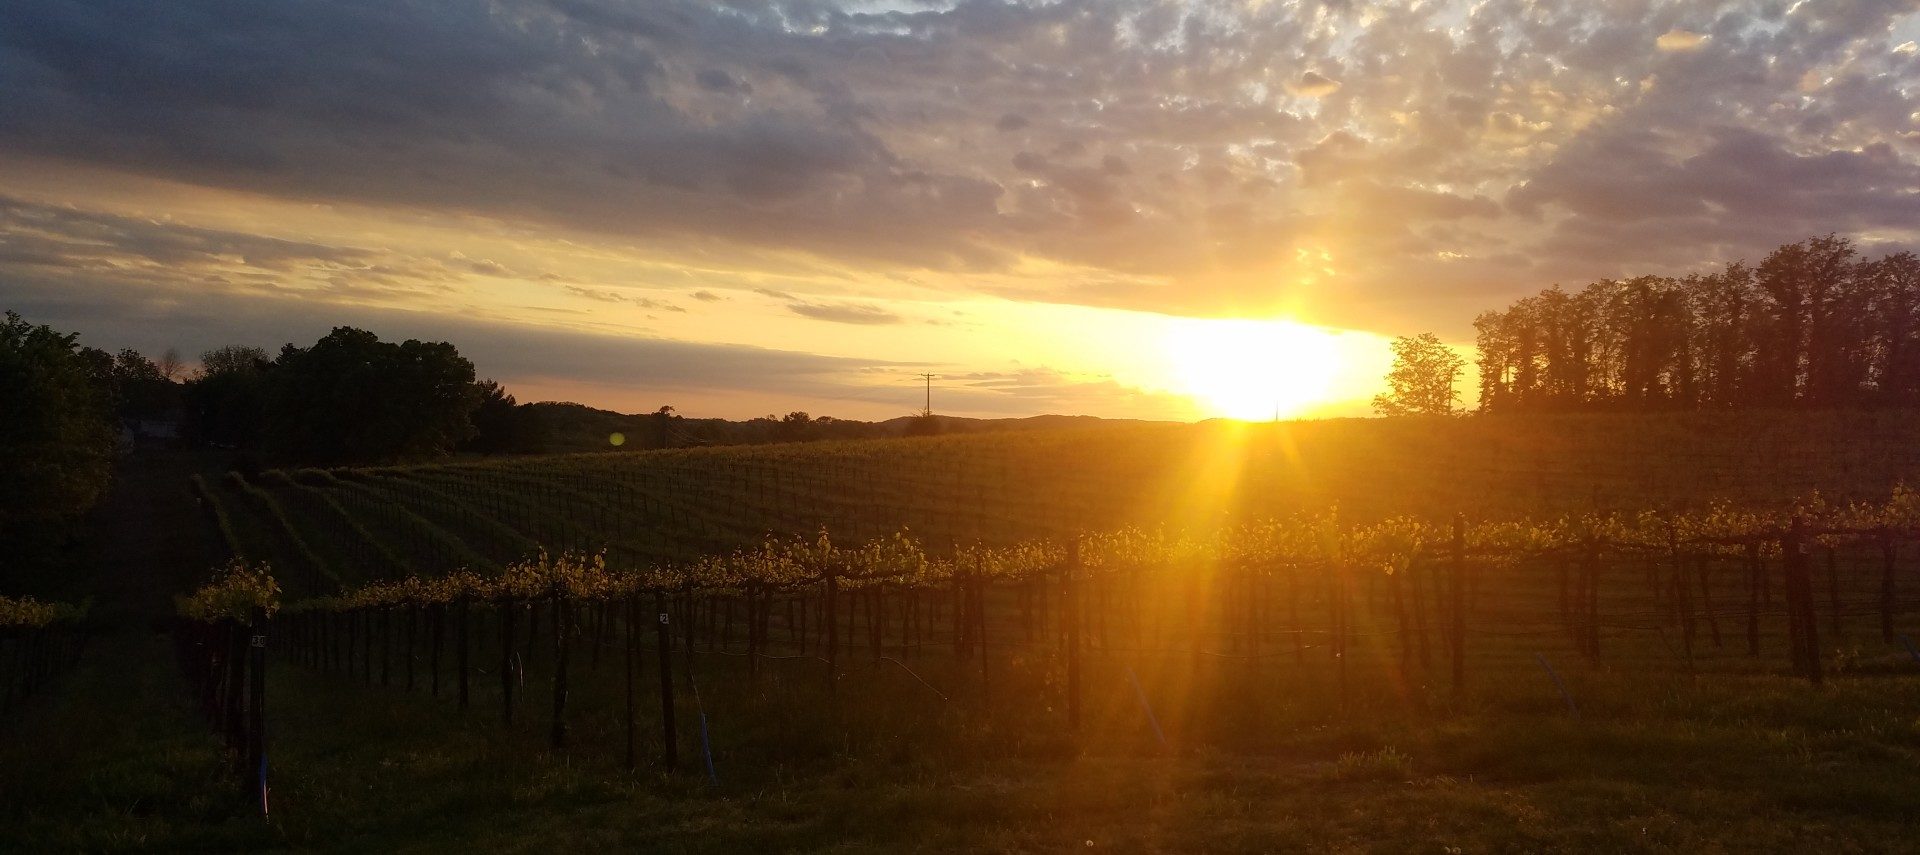 Bright evening sun shining over an expansive vineyard with trees in the background